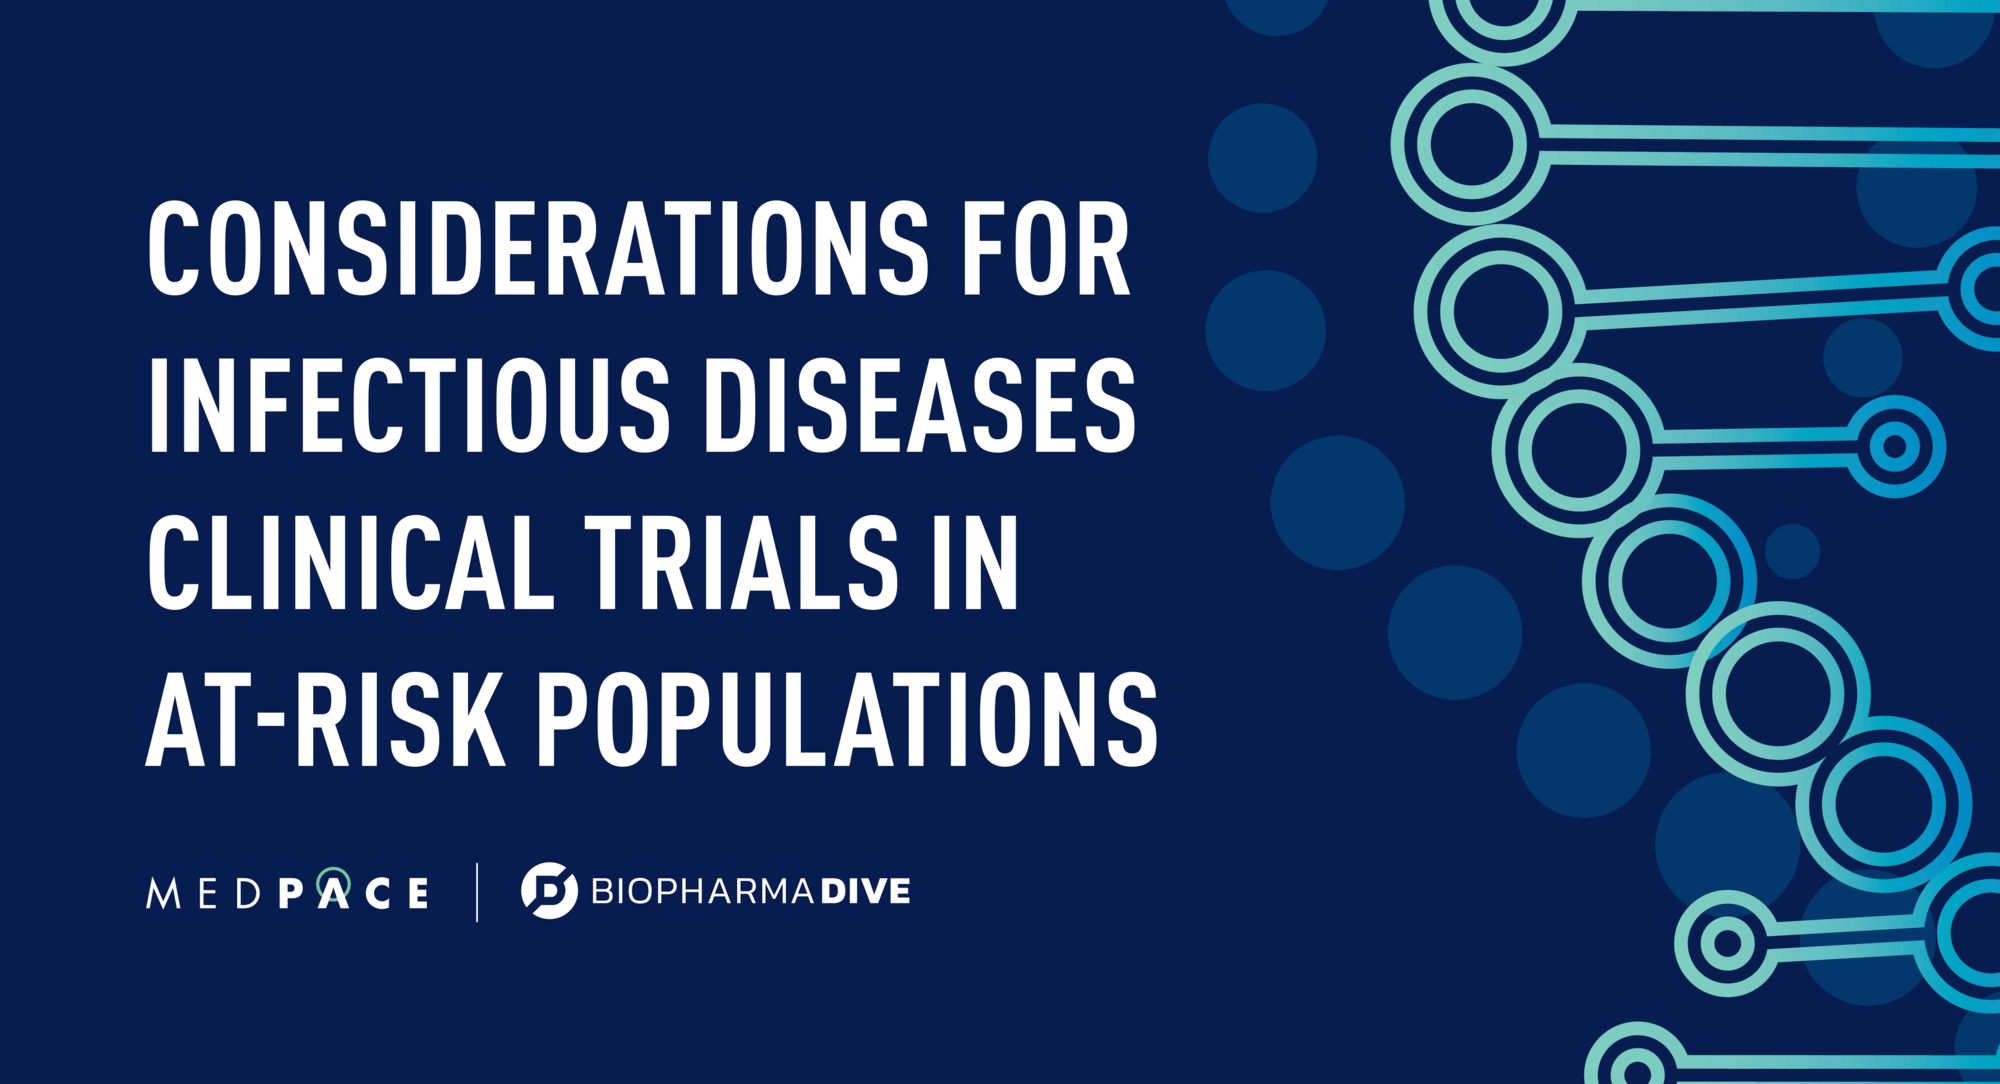 Considerations for Infectious Diseases Clinical Trials in At-Risk Populations